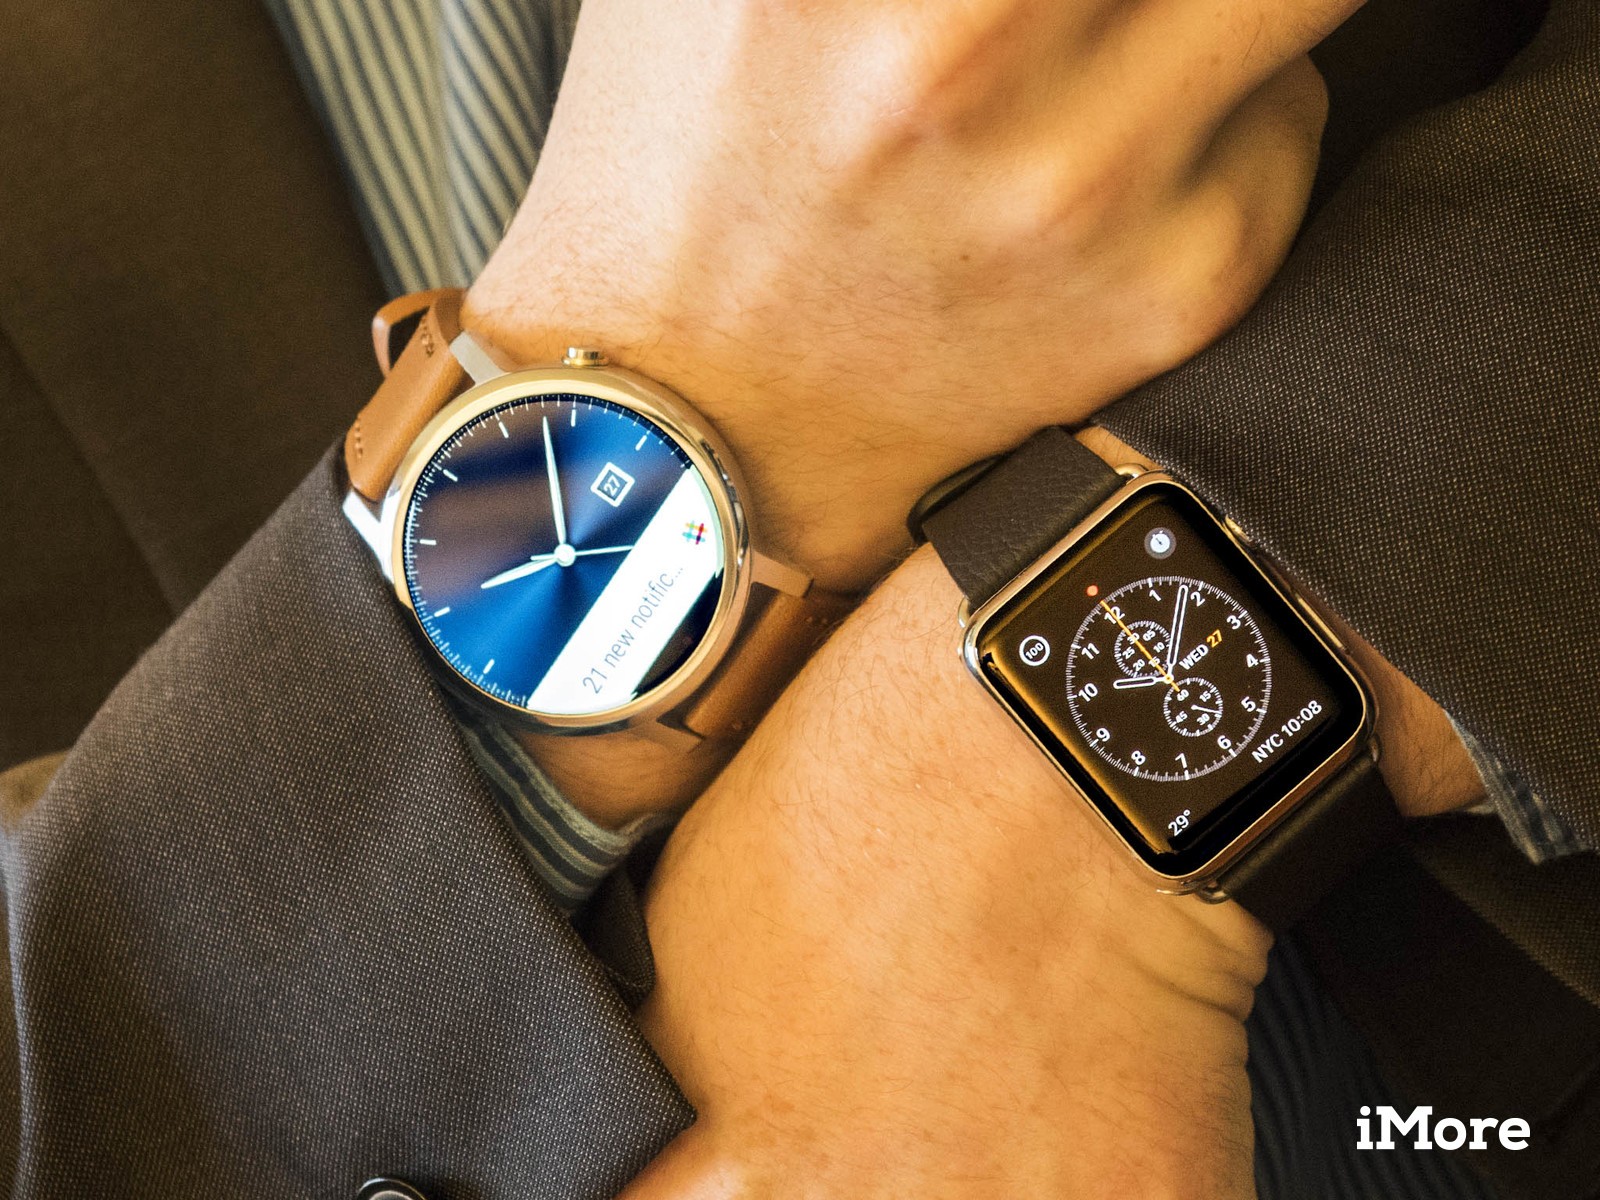 Android Wear And Apple Watch - Wearing 2 Watches Apple - HD Wallpaper 